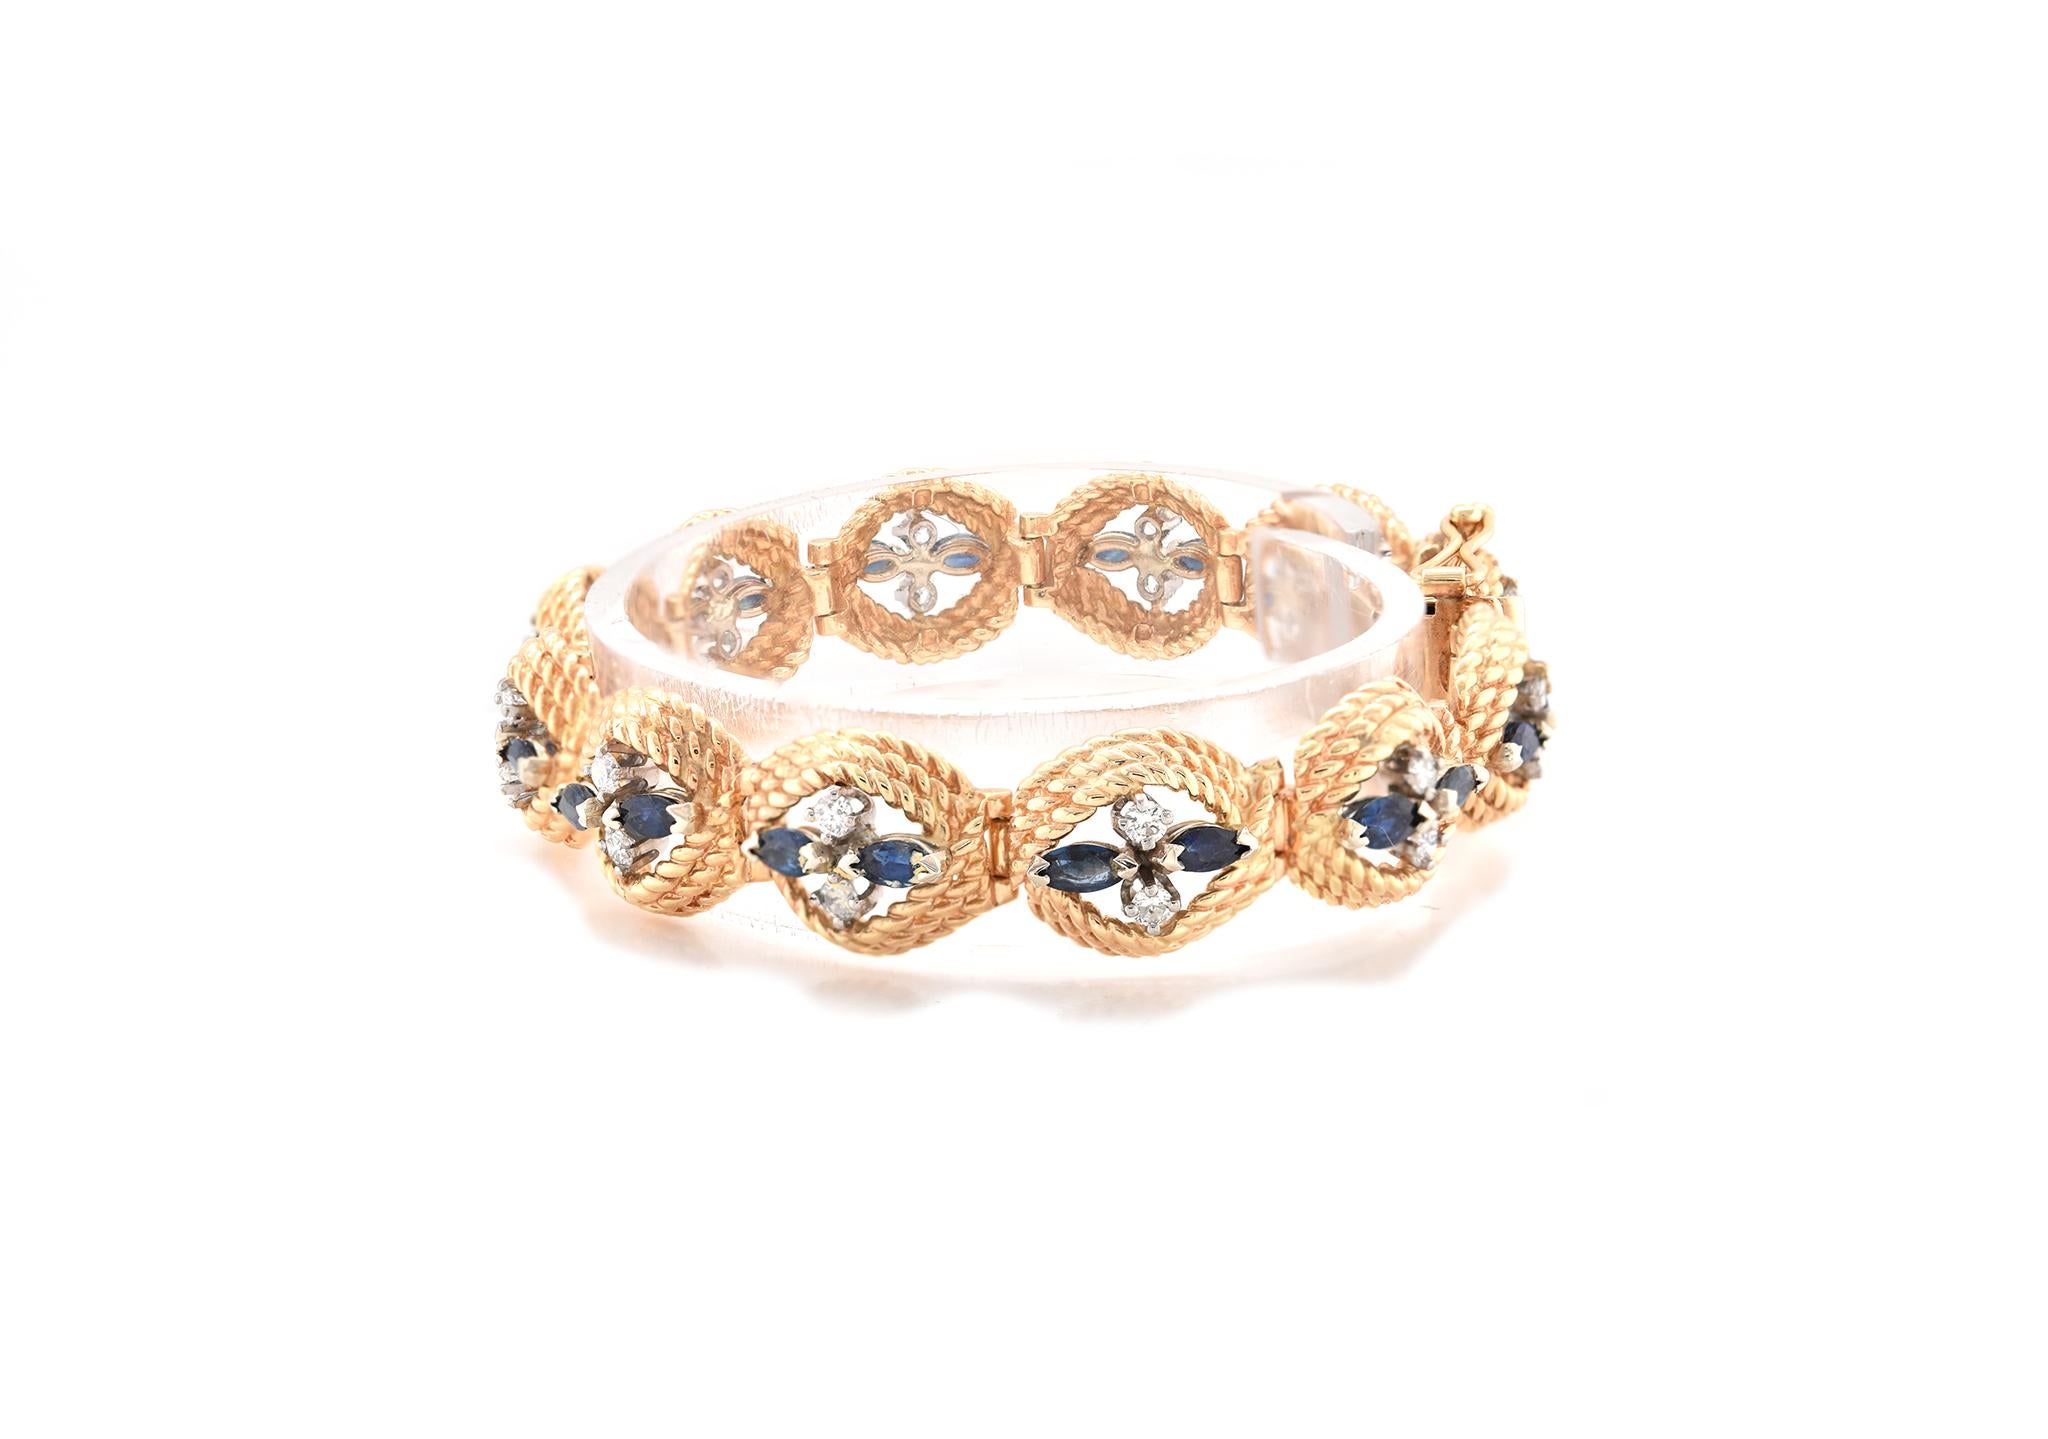 Material: 14K yellow gold
Diamond: 24 round cut = .72cttw
Color: H
Clarity: SI1
Dimensions: bracelet will fit a 7-inch wrist
Weight: 27.32 grams
